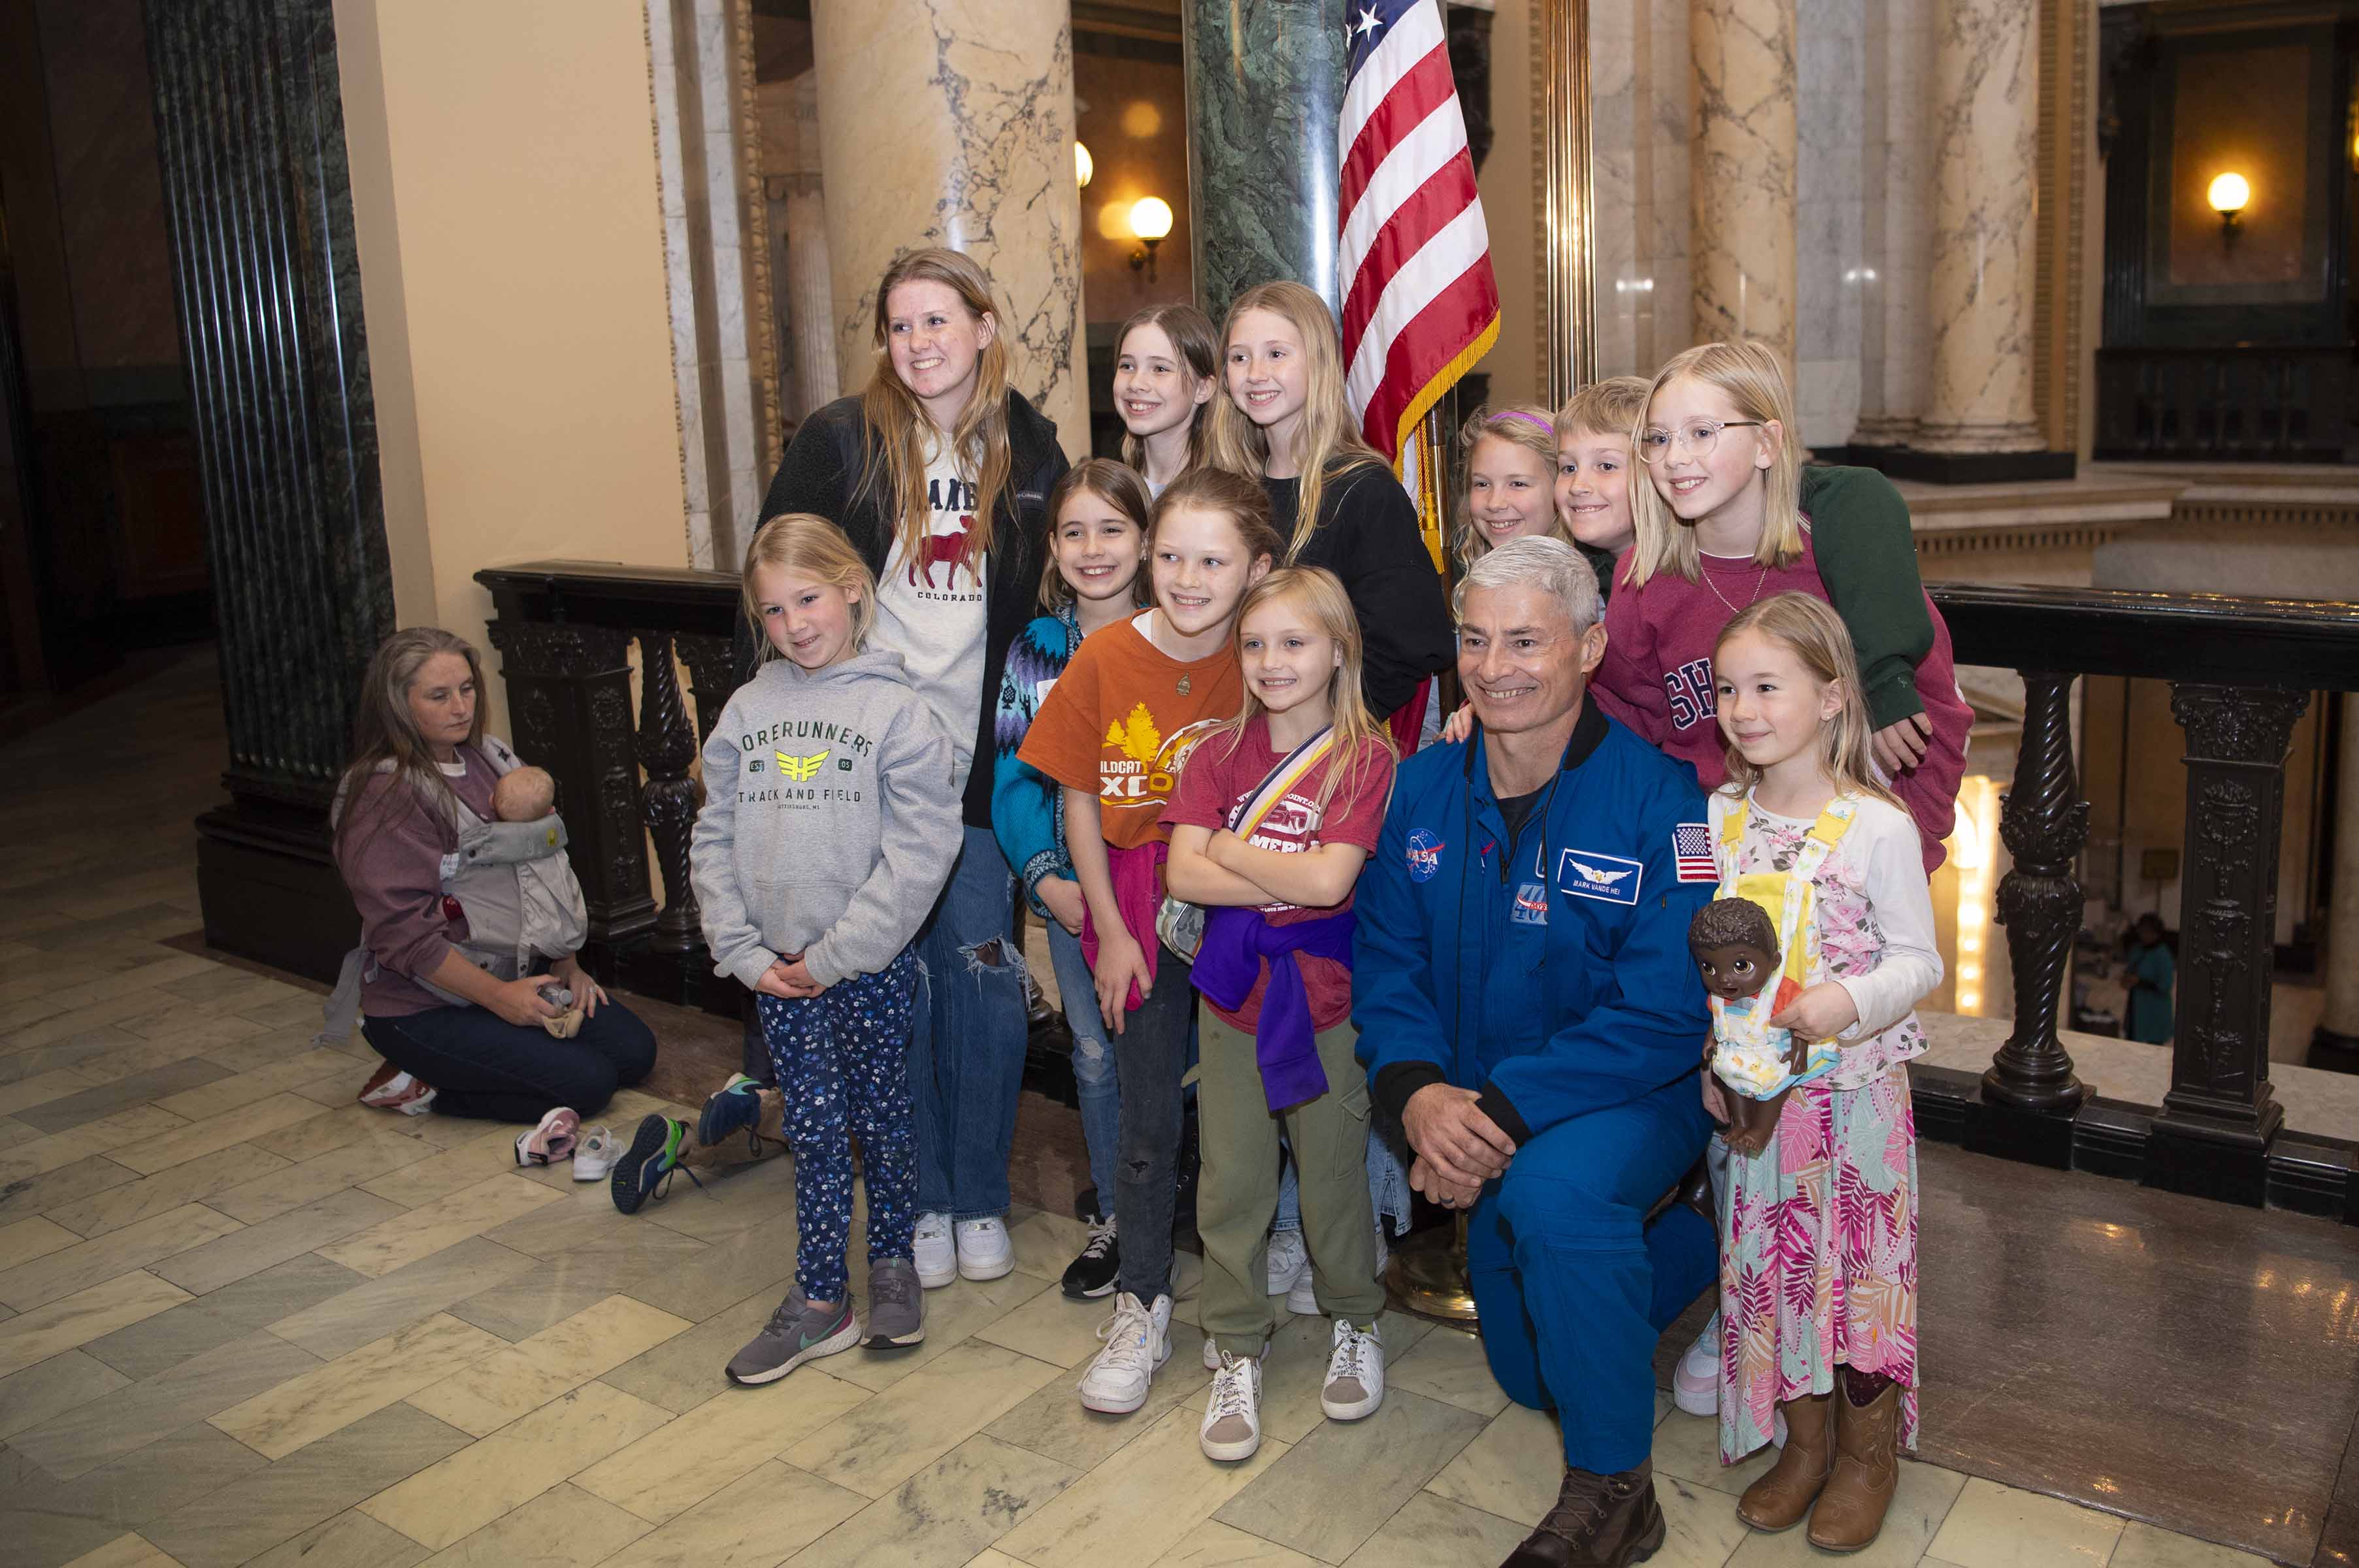 NASA astronaut Mark Vande Hei is pictured with children visiting the Mississippi State Capitol in Jackson, Mississippi